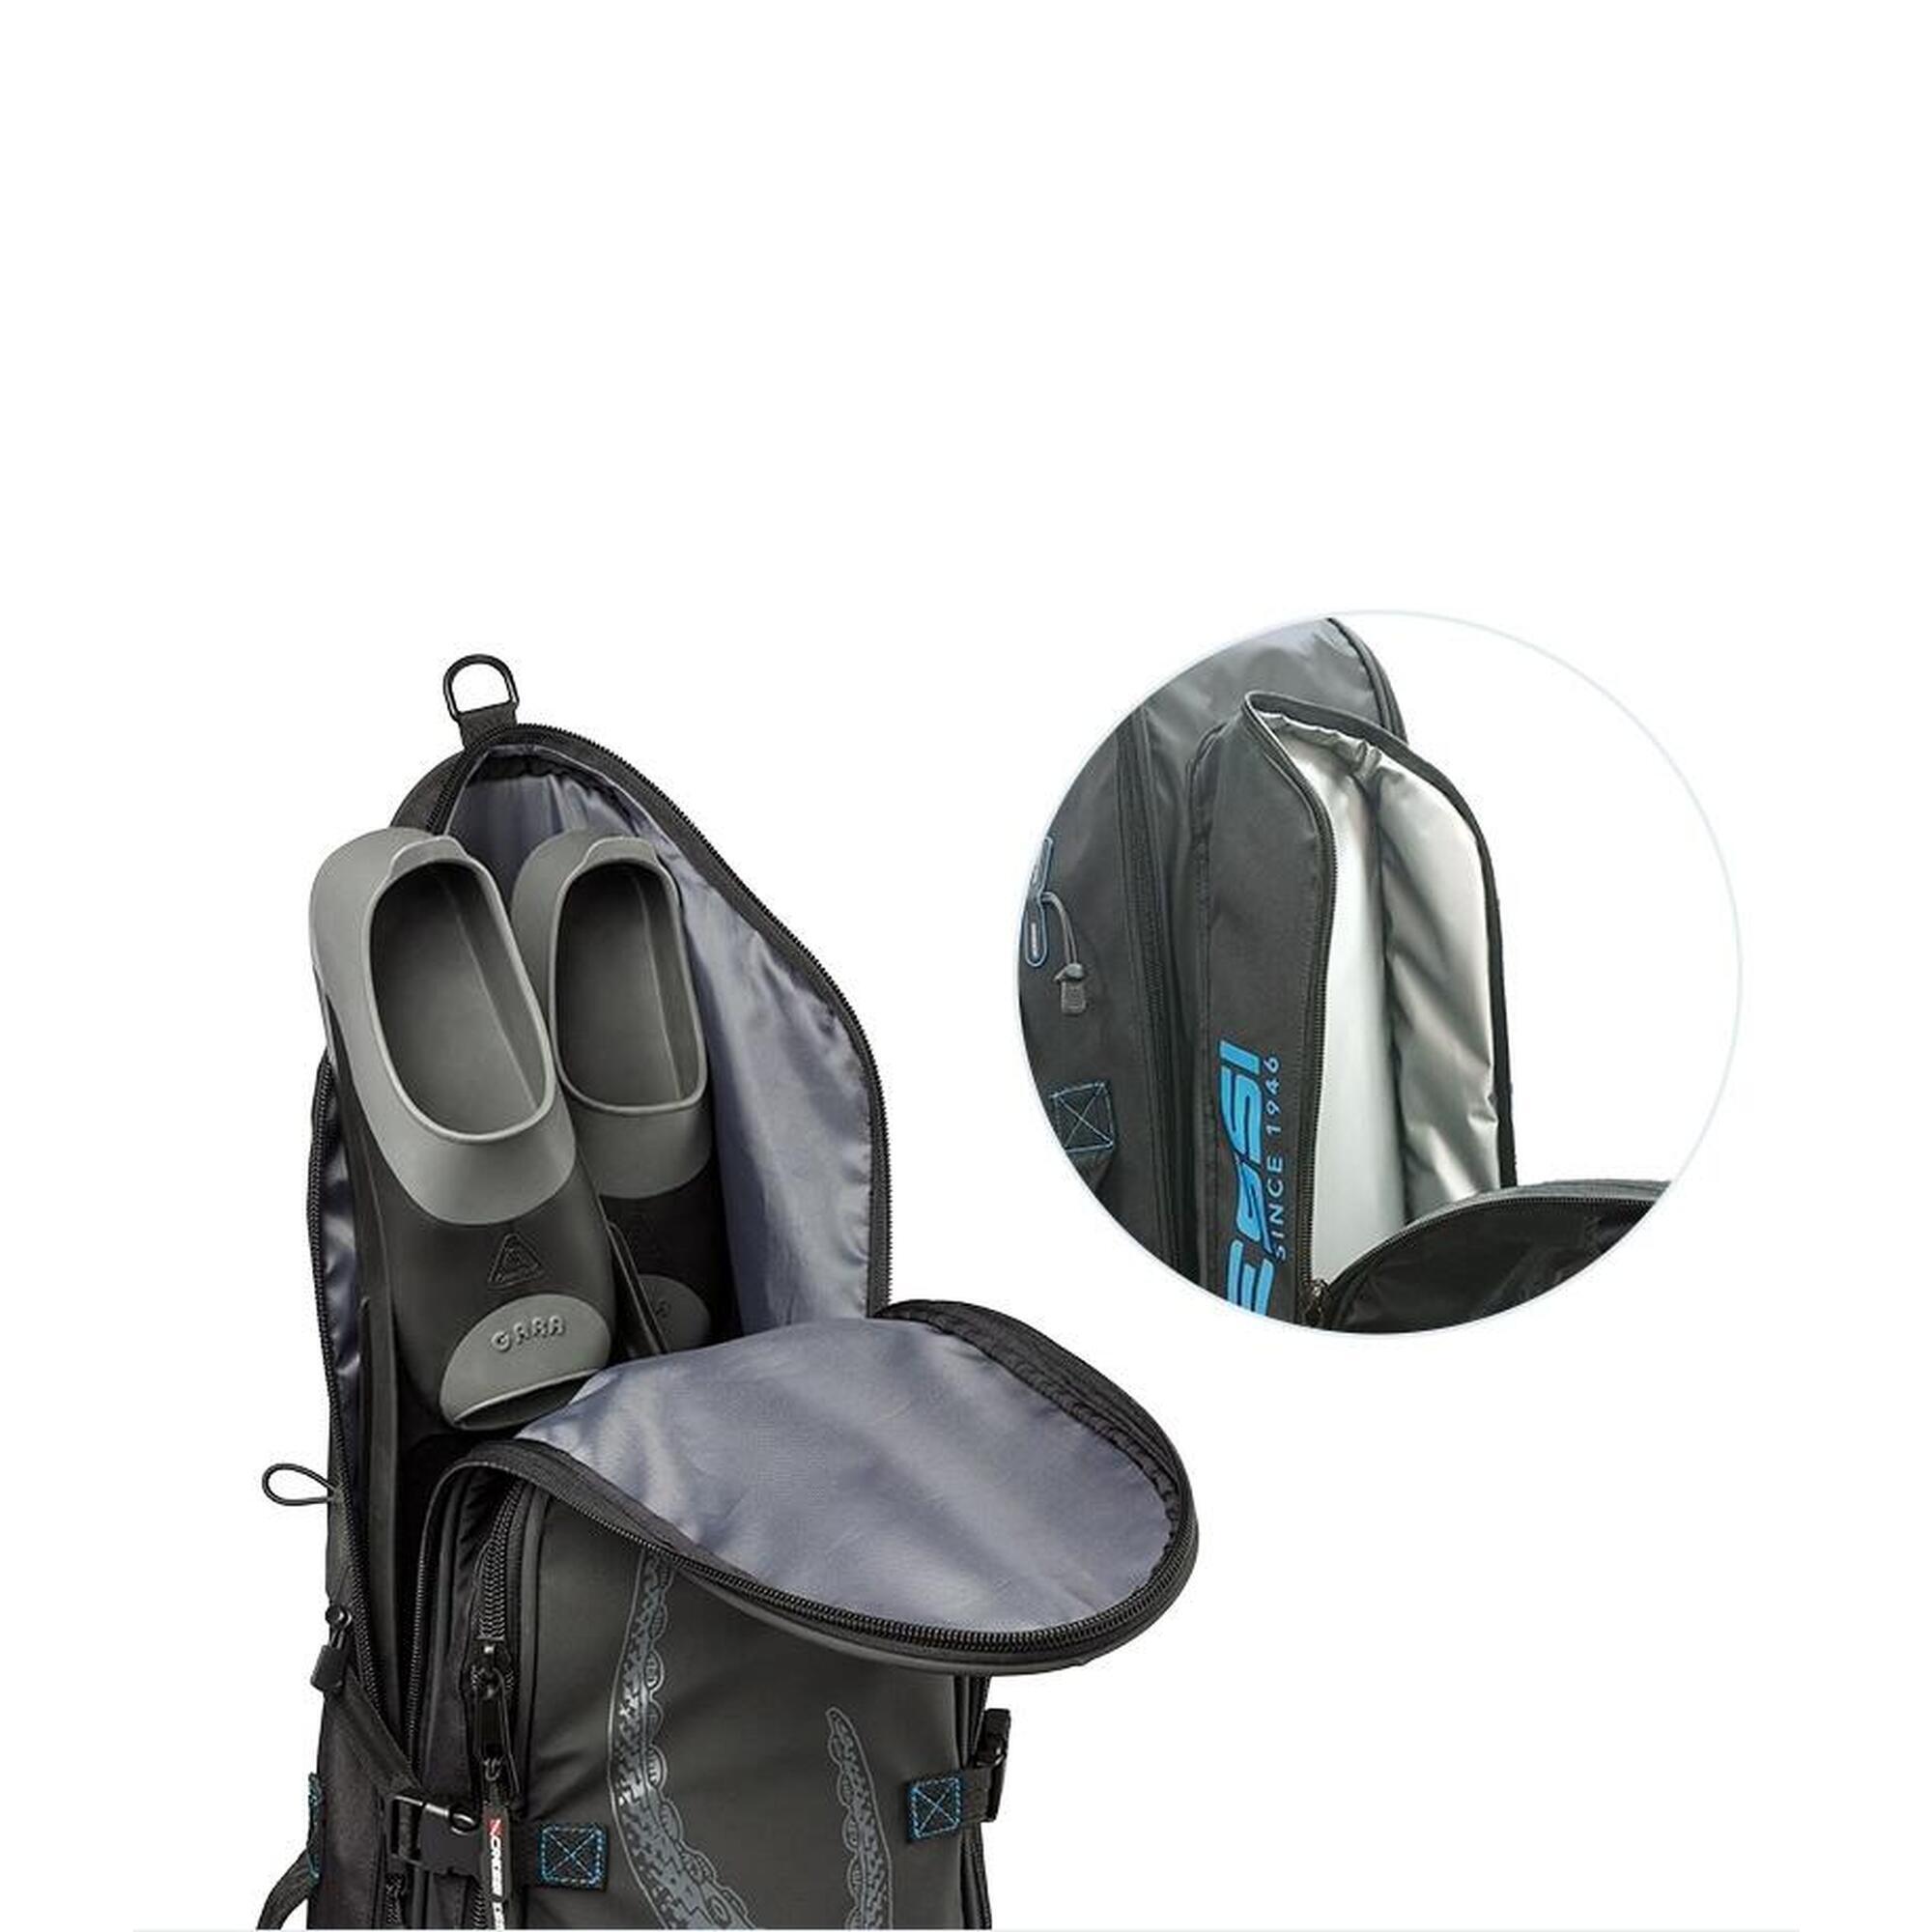 Piovra Xl Bag Long blade Fins Backpack with Water Repellant Treatment 90L